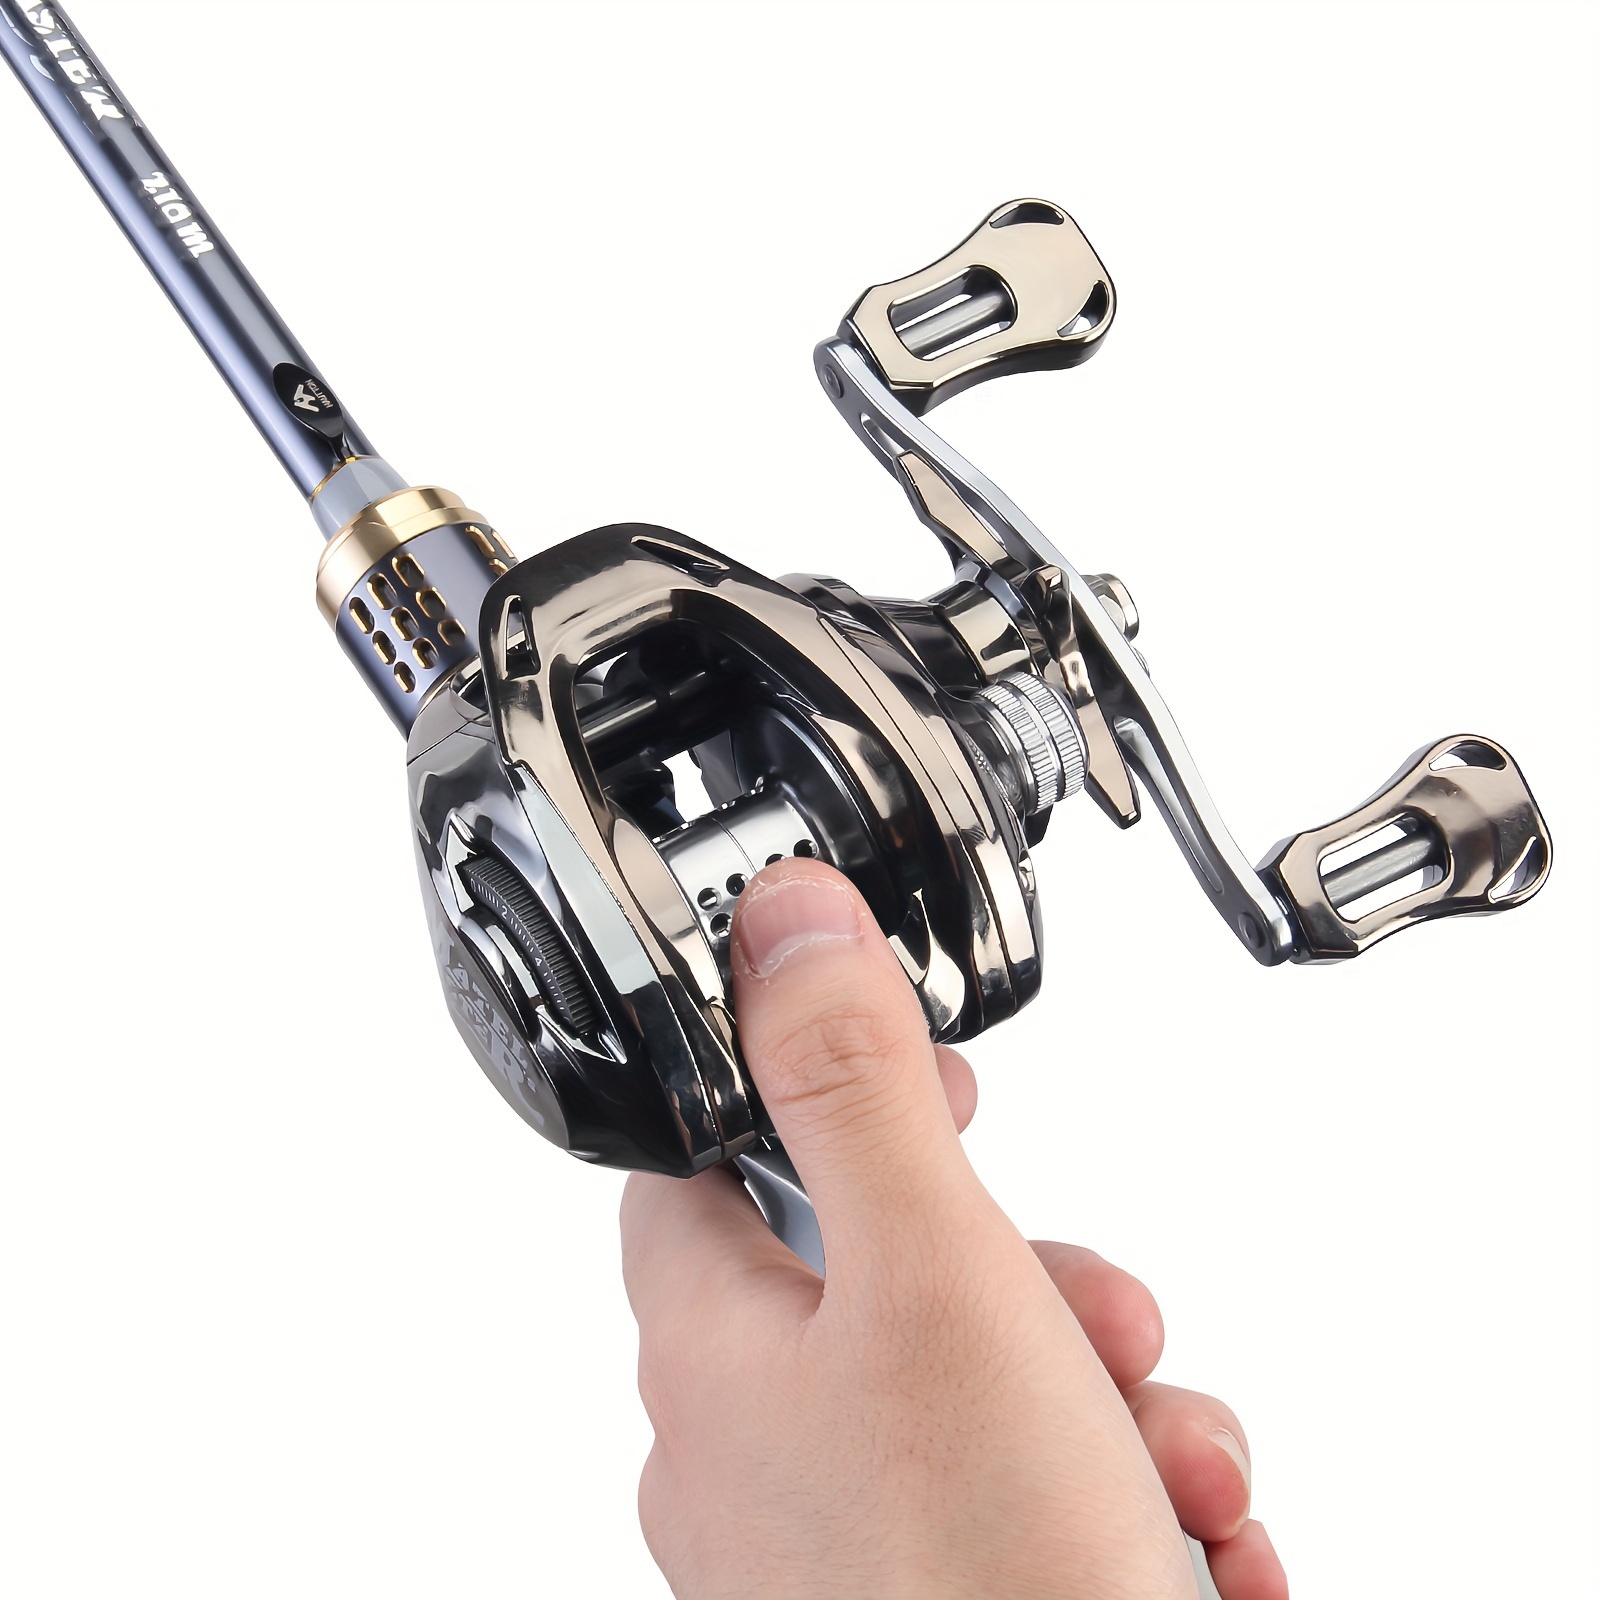 Fishing Rod Reel Combo 24 Ton Carbon Fiber 4 Piece Casting Rod and  Baitcasting Reel Freshwater Saltwater Lure Bass Fishing Sets